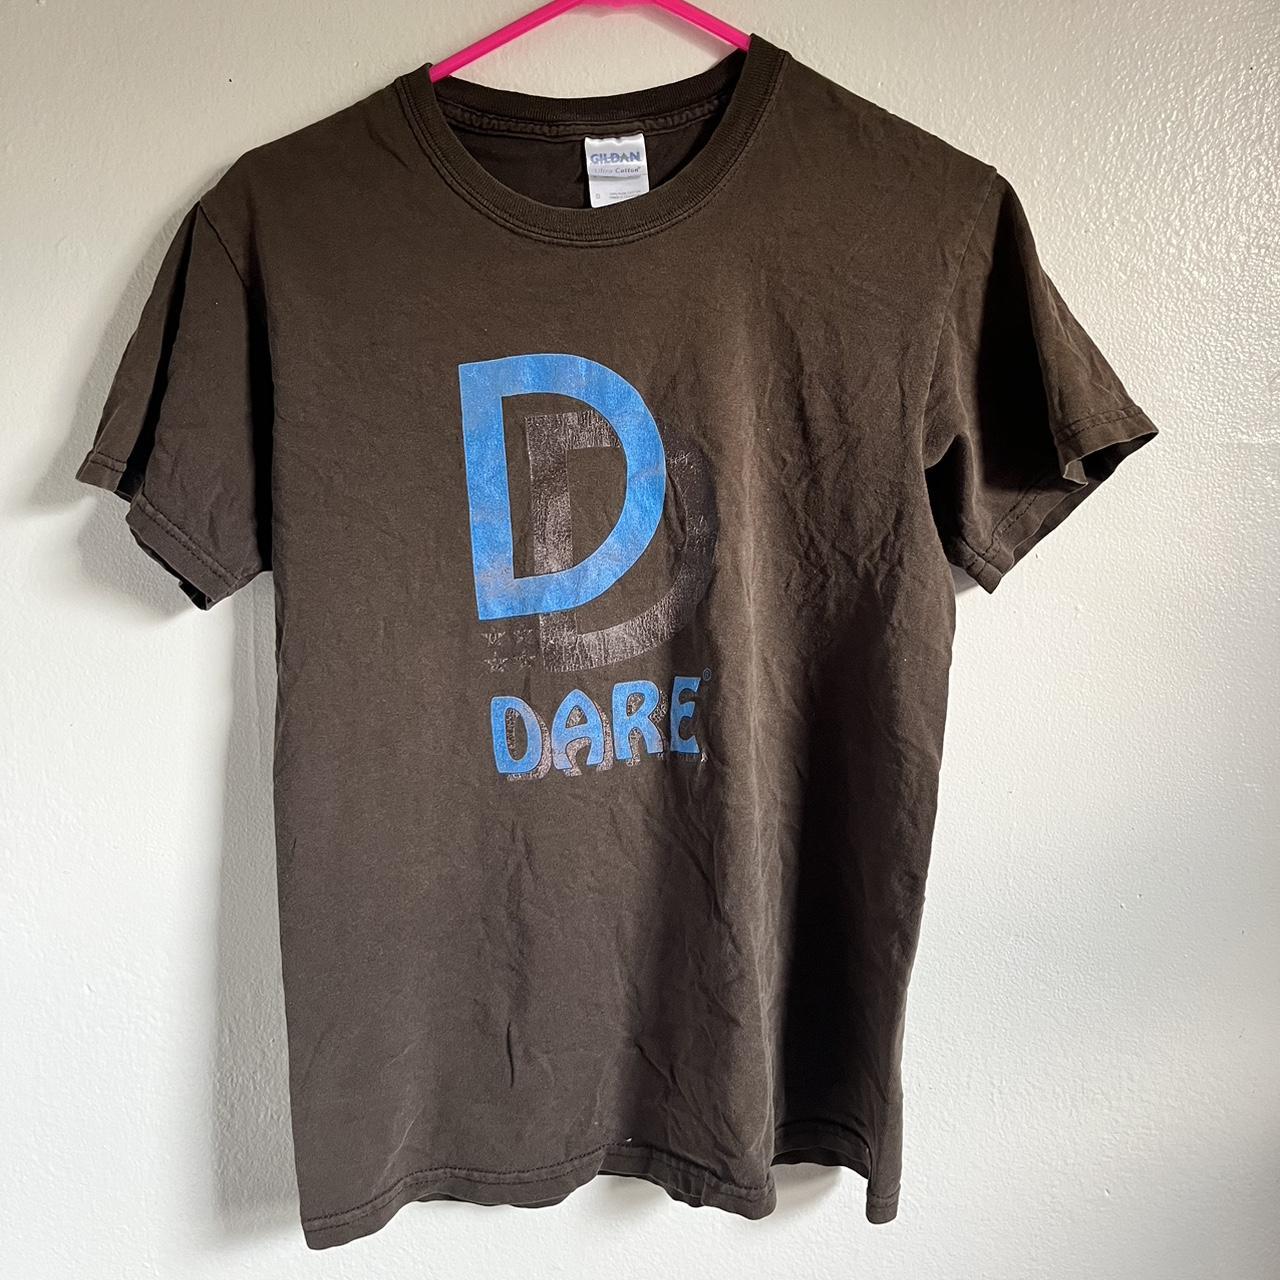 Vintage Small Dare shirt. Little beat up with holes - Depop